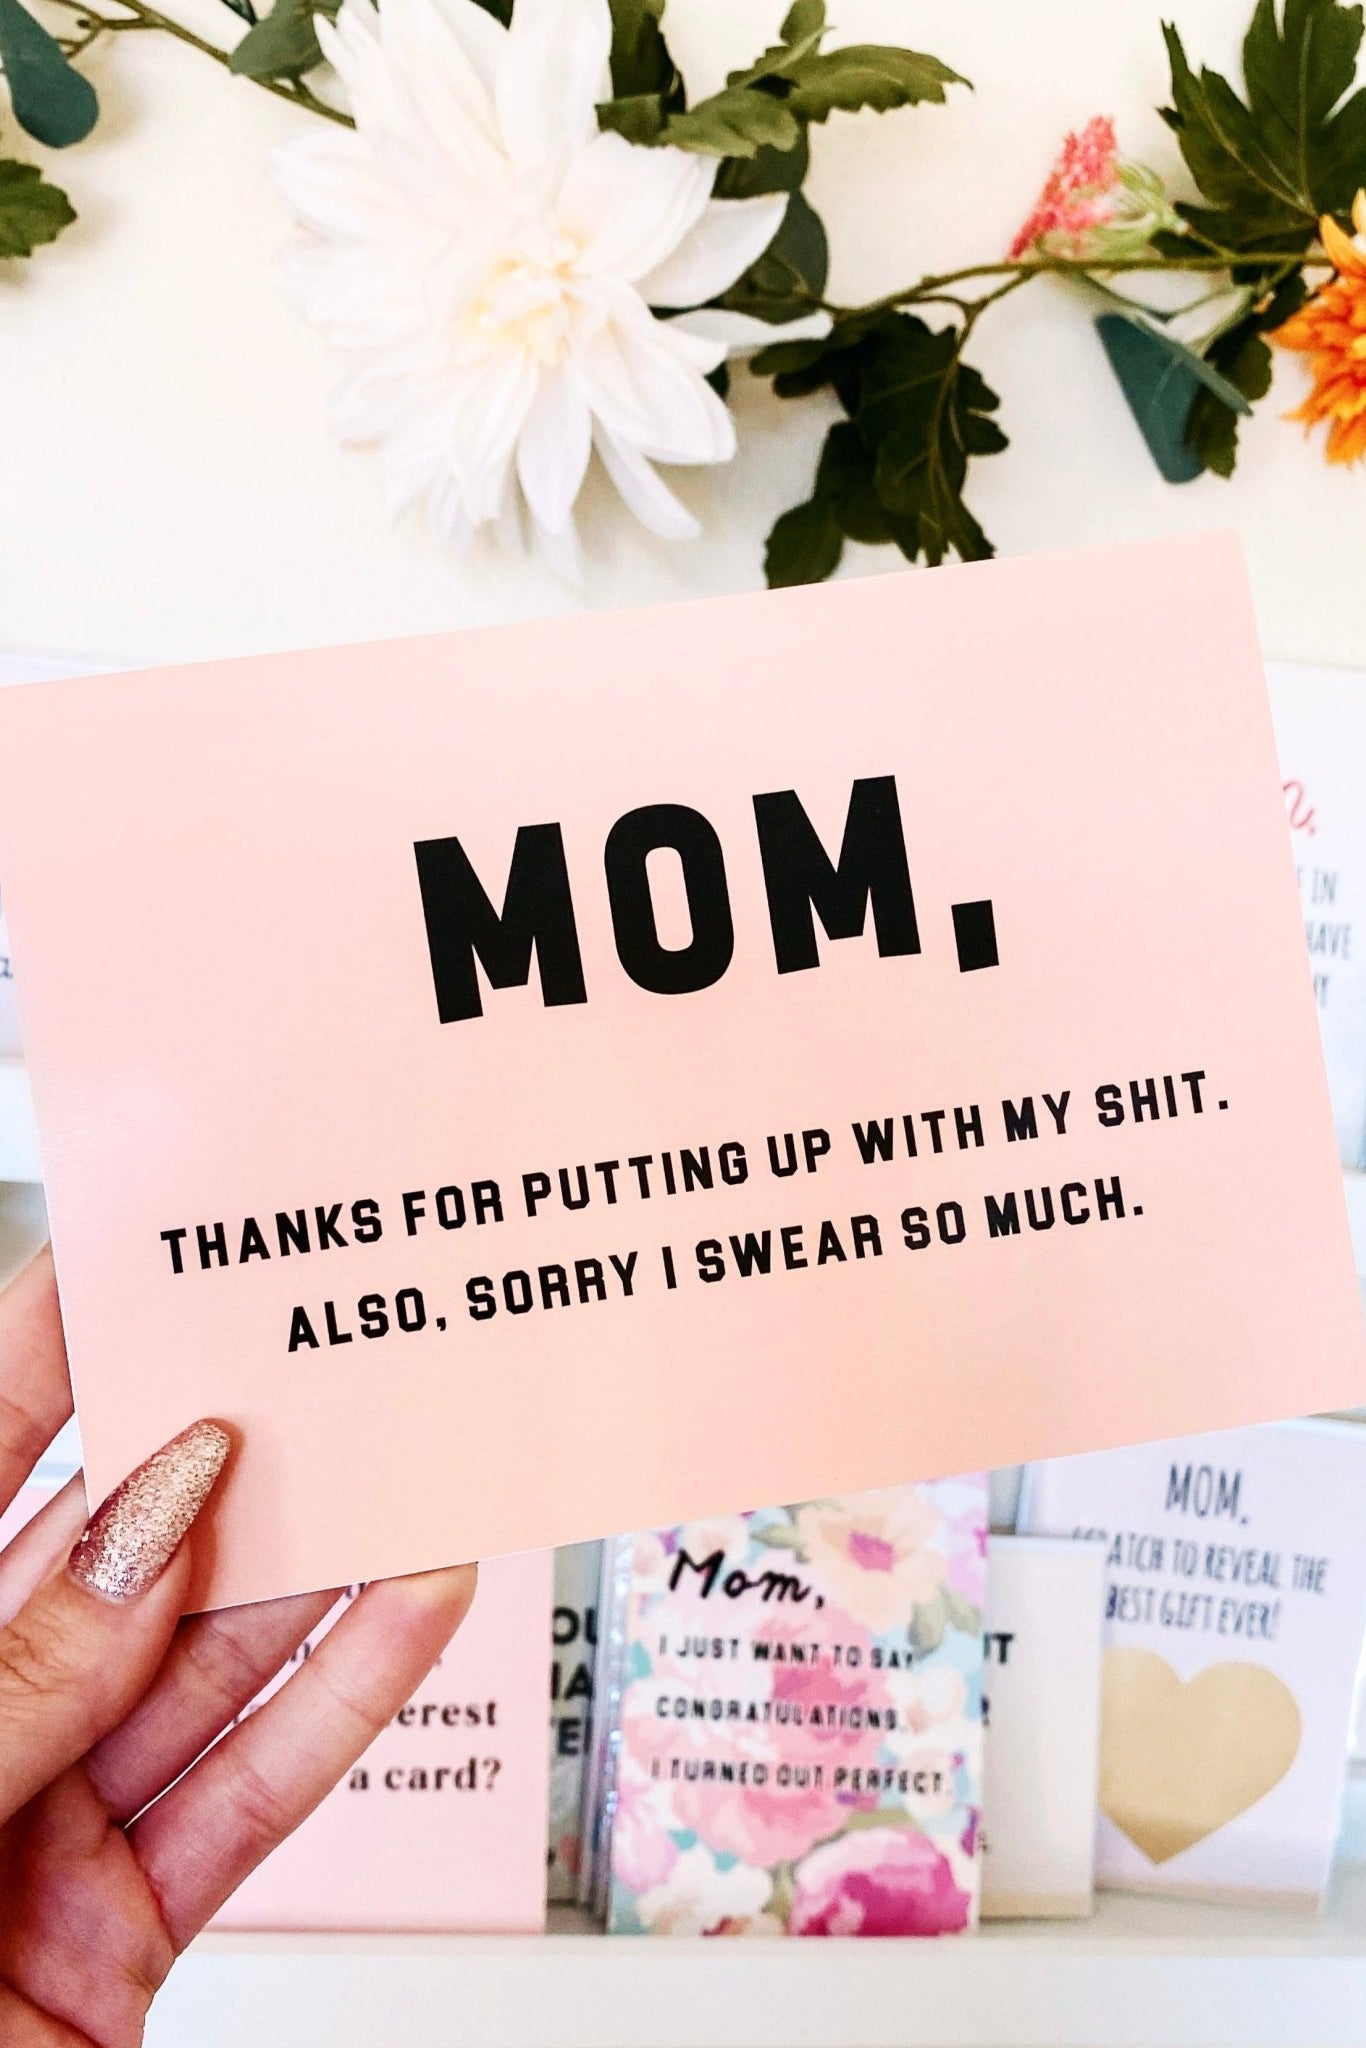 Mom Thanks For Putting Up With My Shi* Also Sorry I Swear So Much Greeting Card - UntamedEgo LLC.